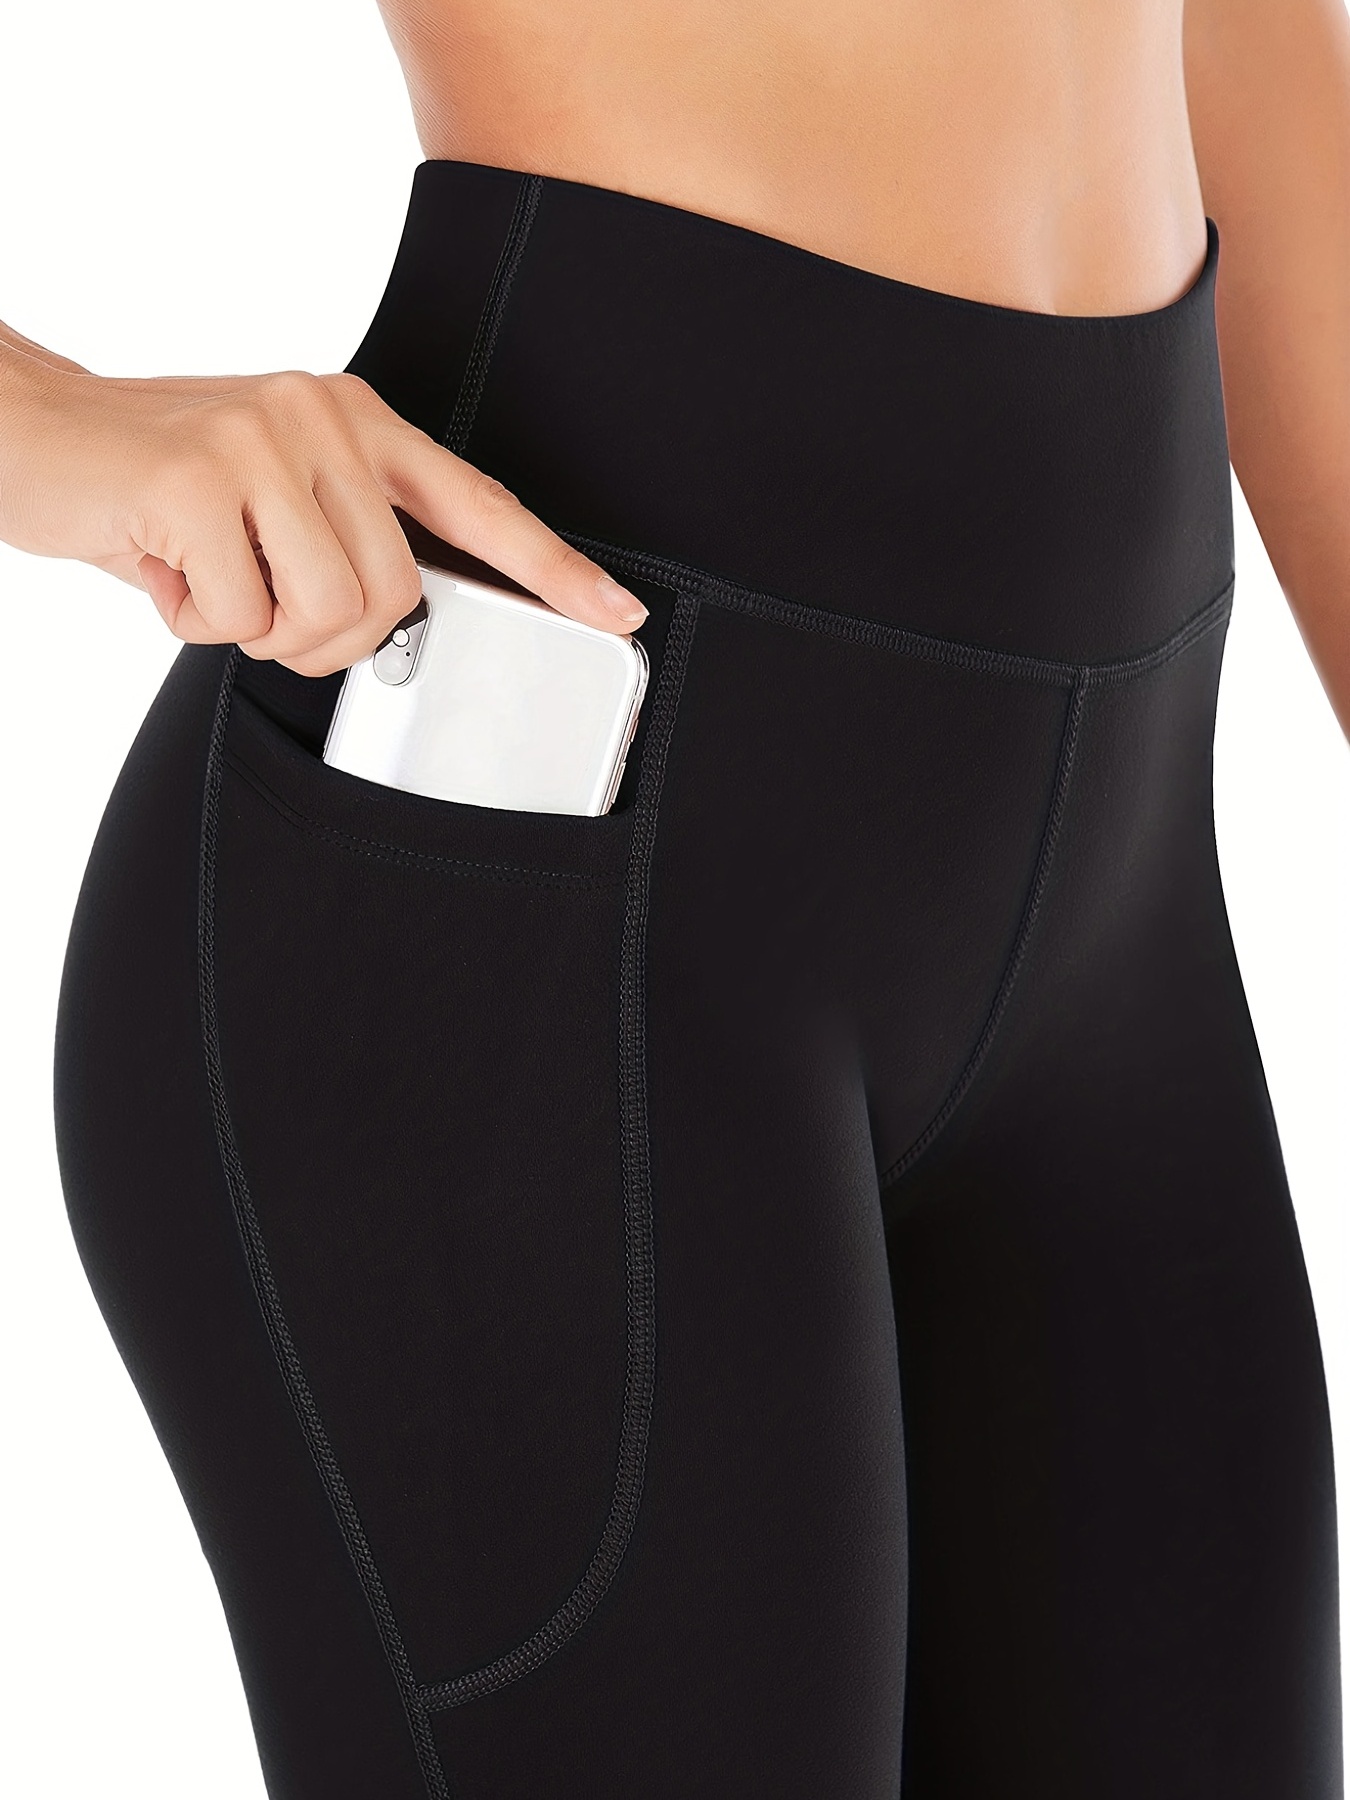 Yoga Pants with Pockets for Women Womens High Waisted Leggings